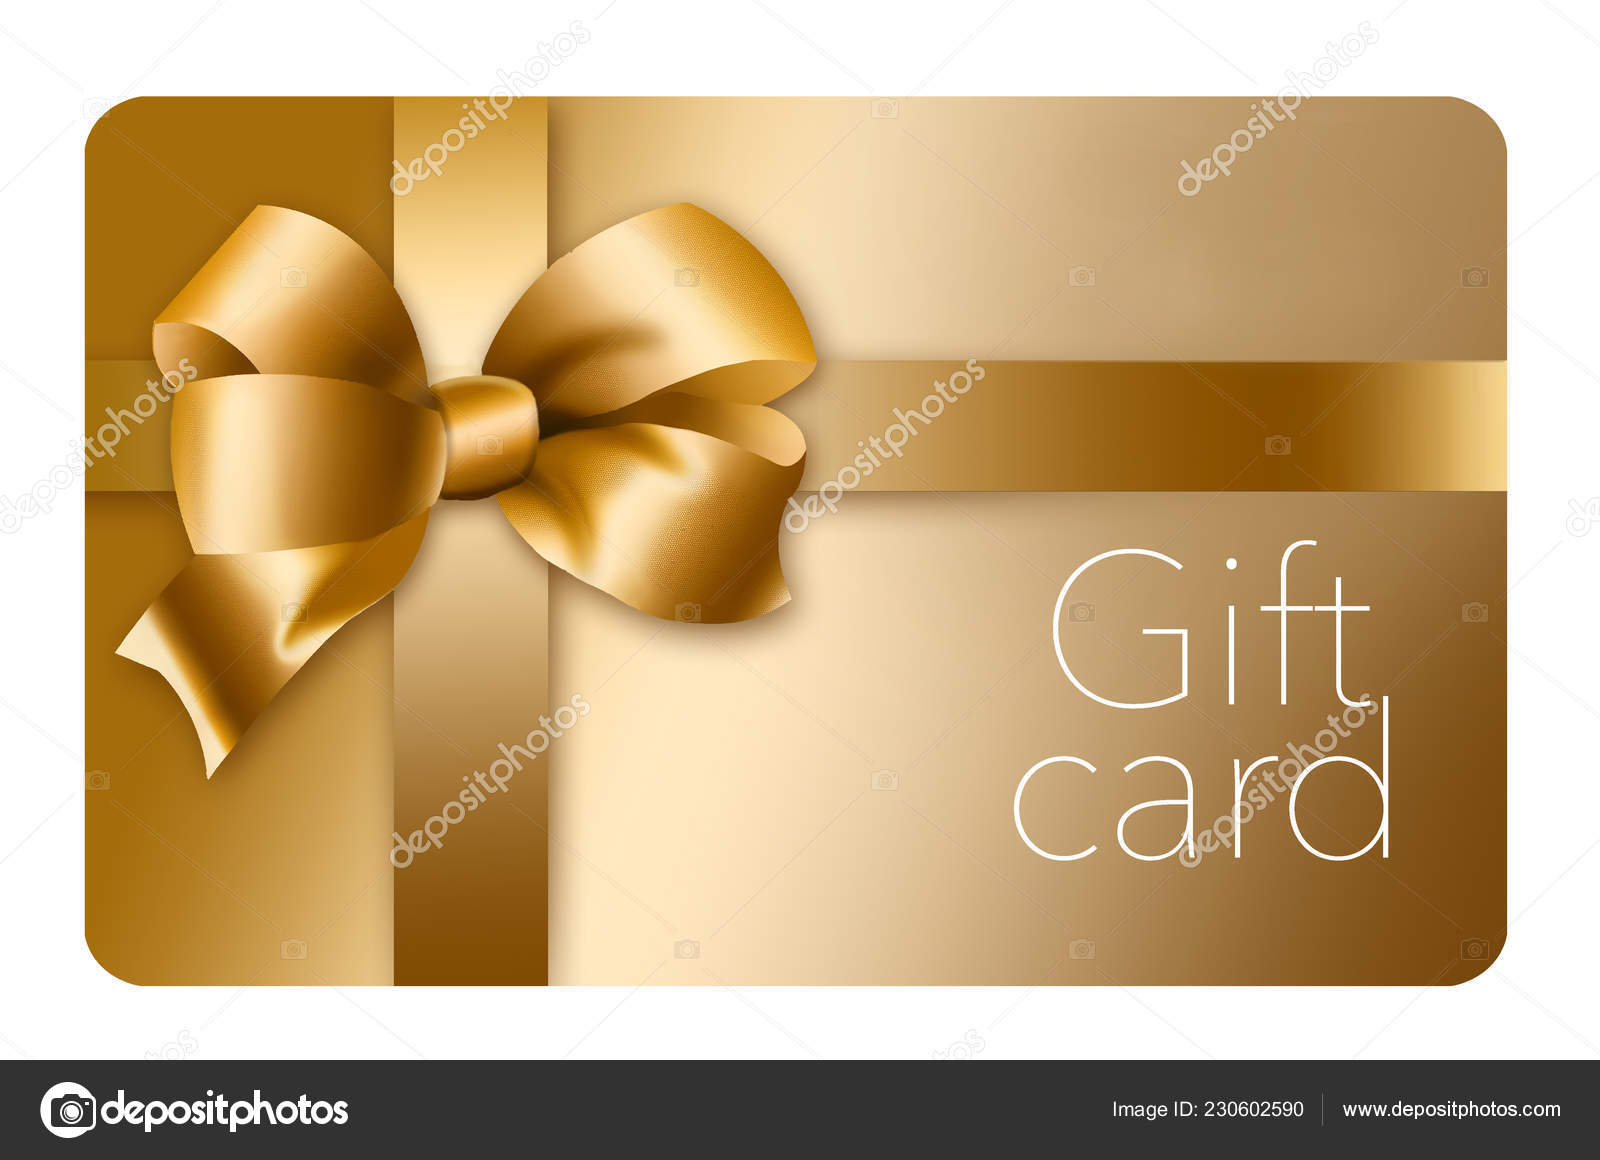 gold-gift-card-gold-bow-ribbon-pictured-here-isolated-background-stock